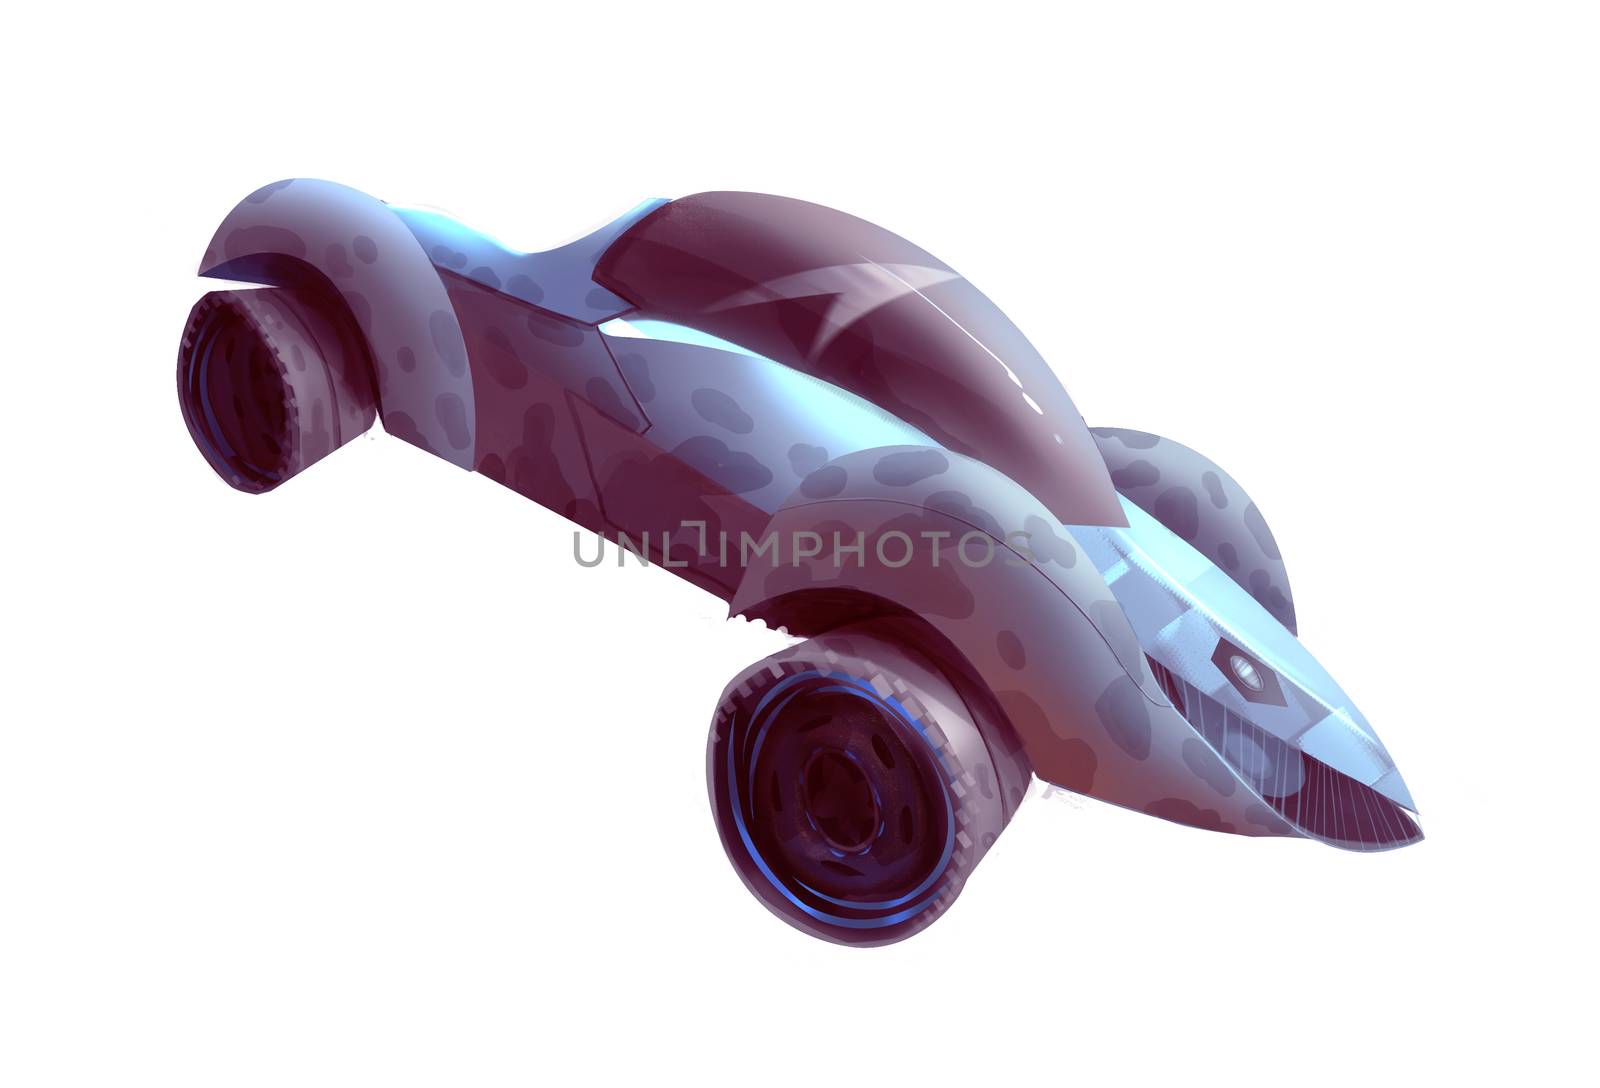 Illustration: The Outsider's Space Car. Realistic Style. Sci-Fi Topic. Element Creation / Leading Role / Main Character Design.